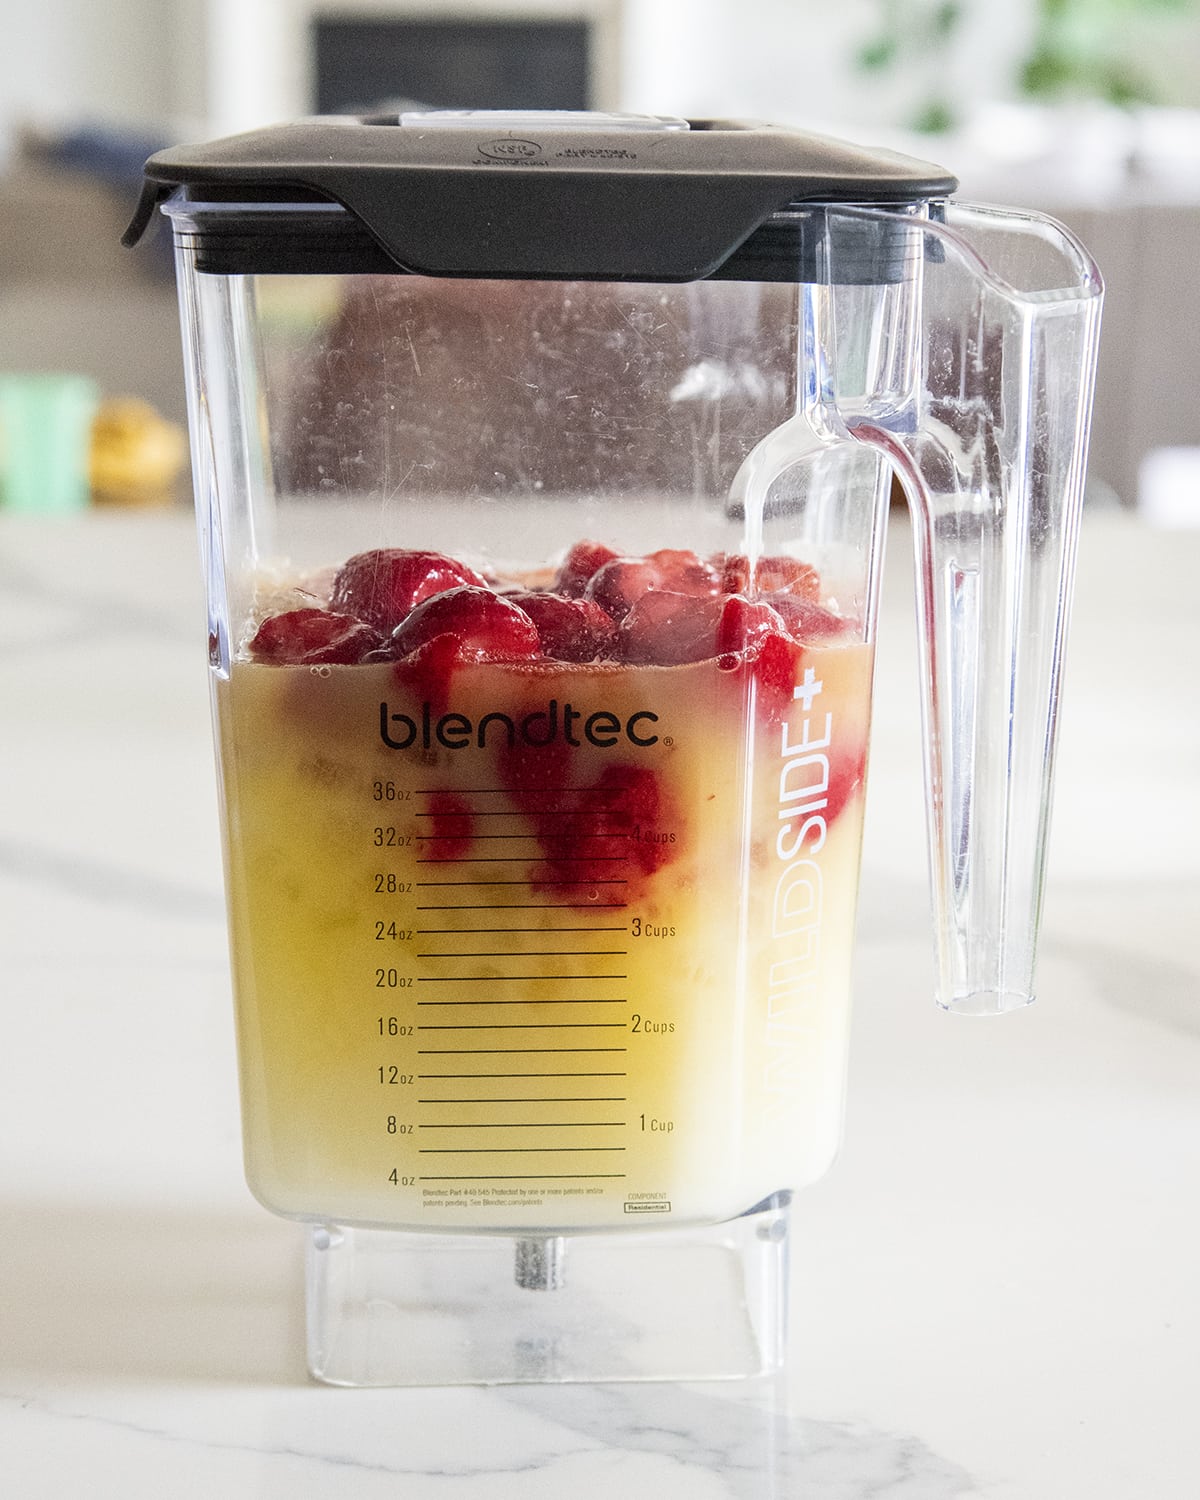 A blender full of a yellow liquid and strawberries.